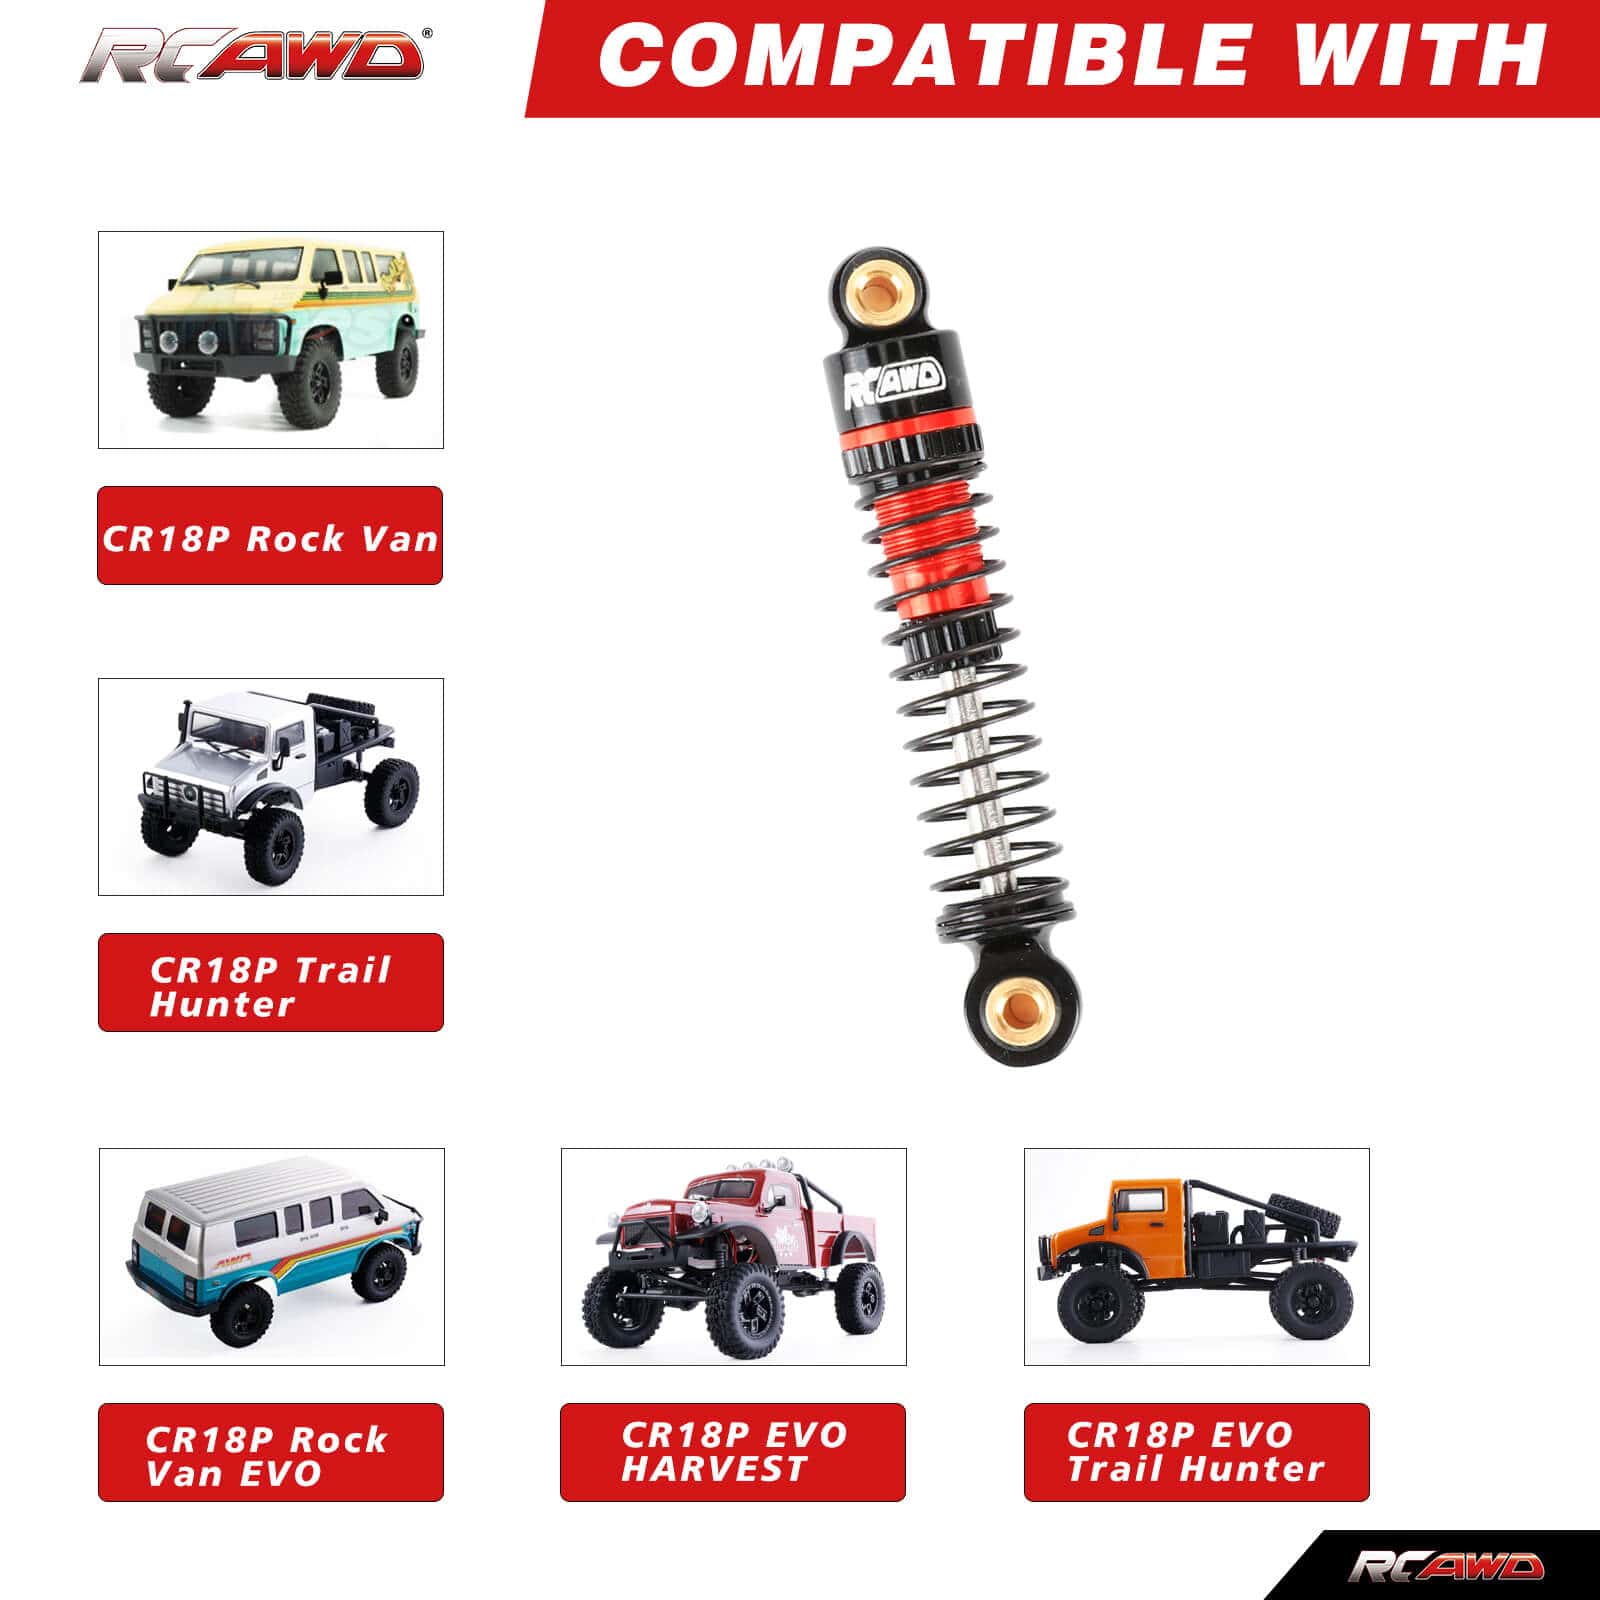 RCAWD FMS FCX24 RCAWD FMS FCX24 Upgrades 47mm Damper Shock Absorber Oil filled Type